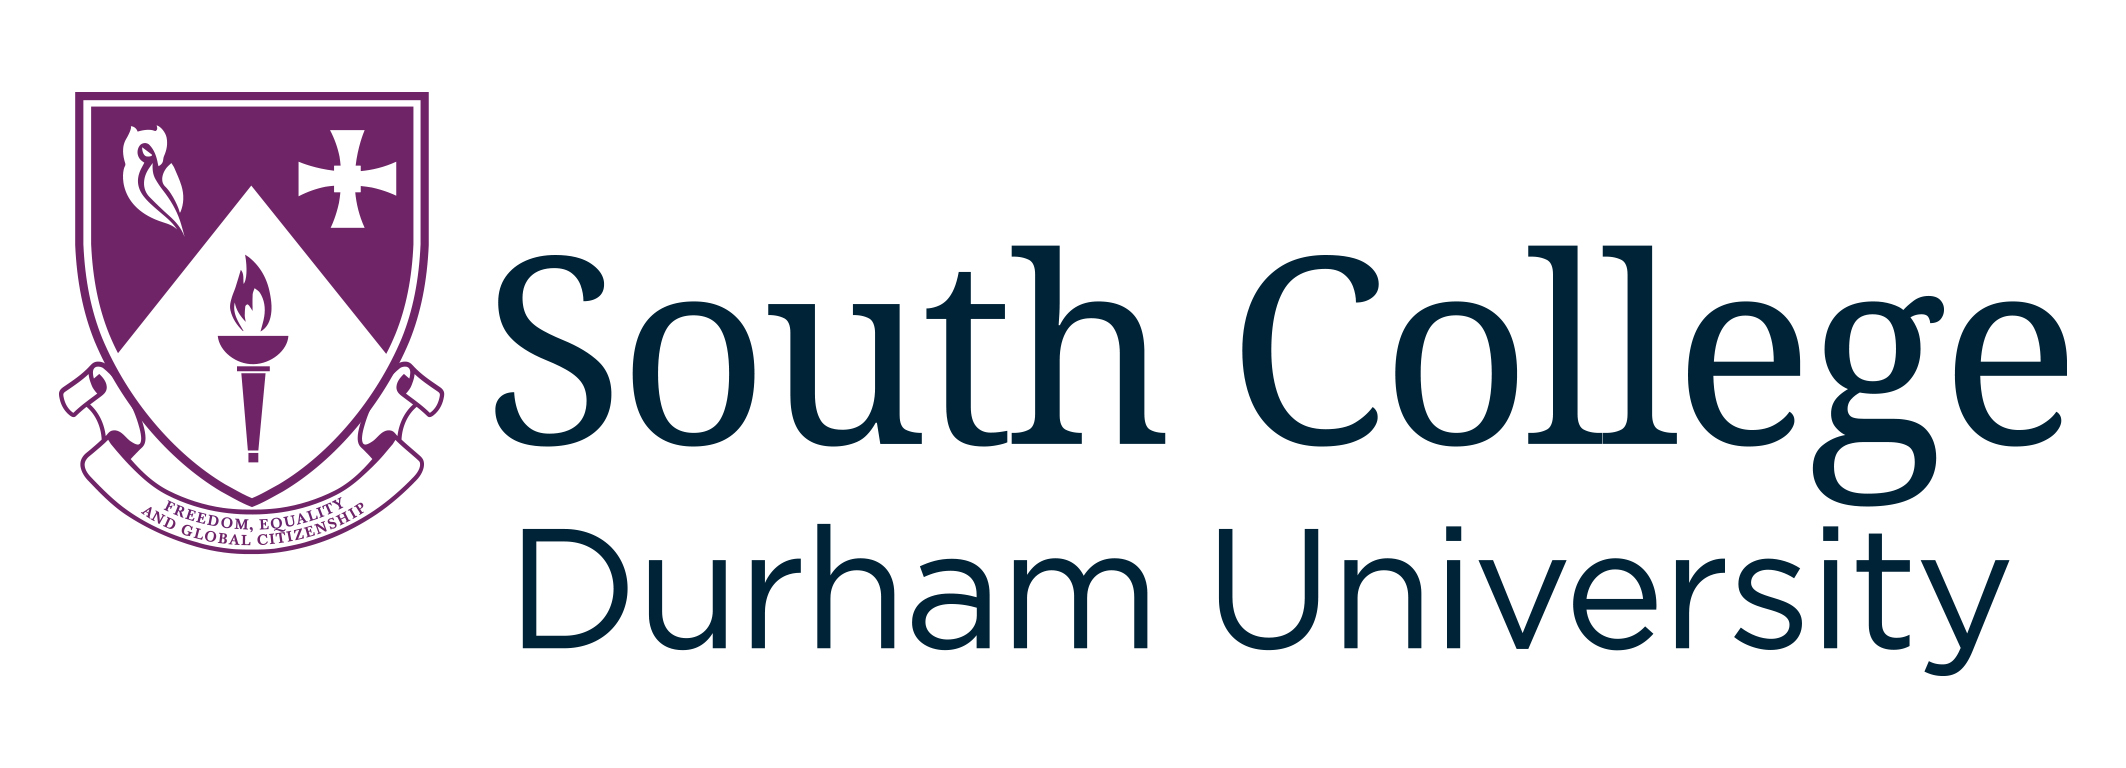 South College Sports subs - Women's Football